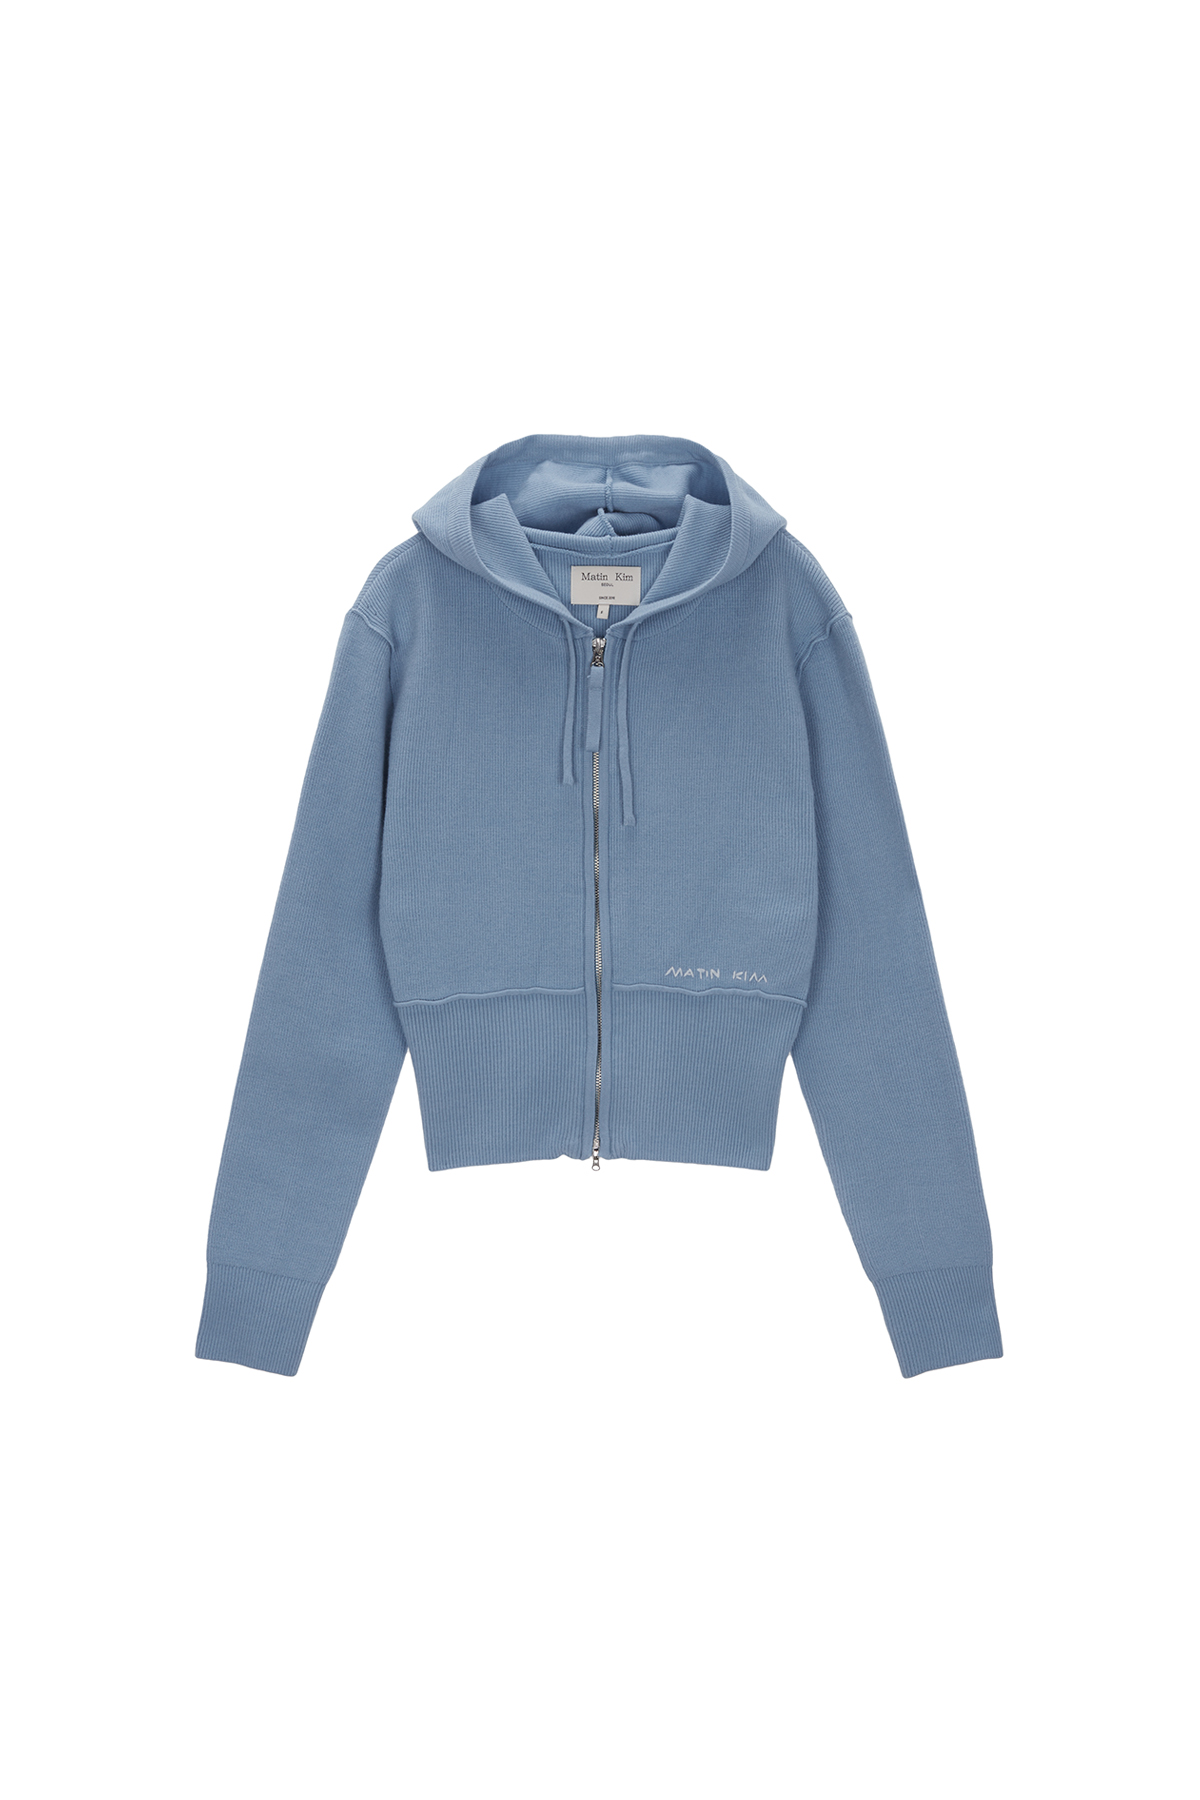 RIBBED KNIT HOODY ZIP UP FOR WOMEN IN SKY